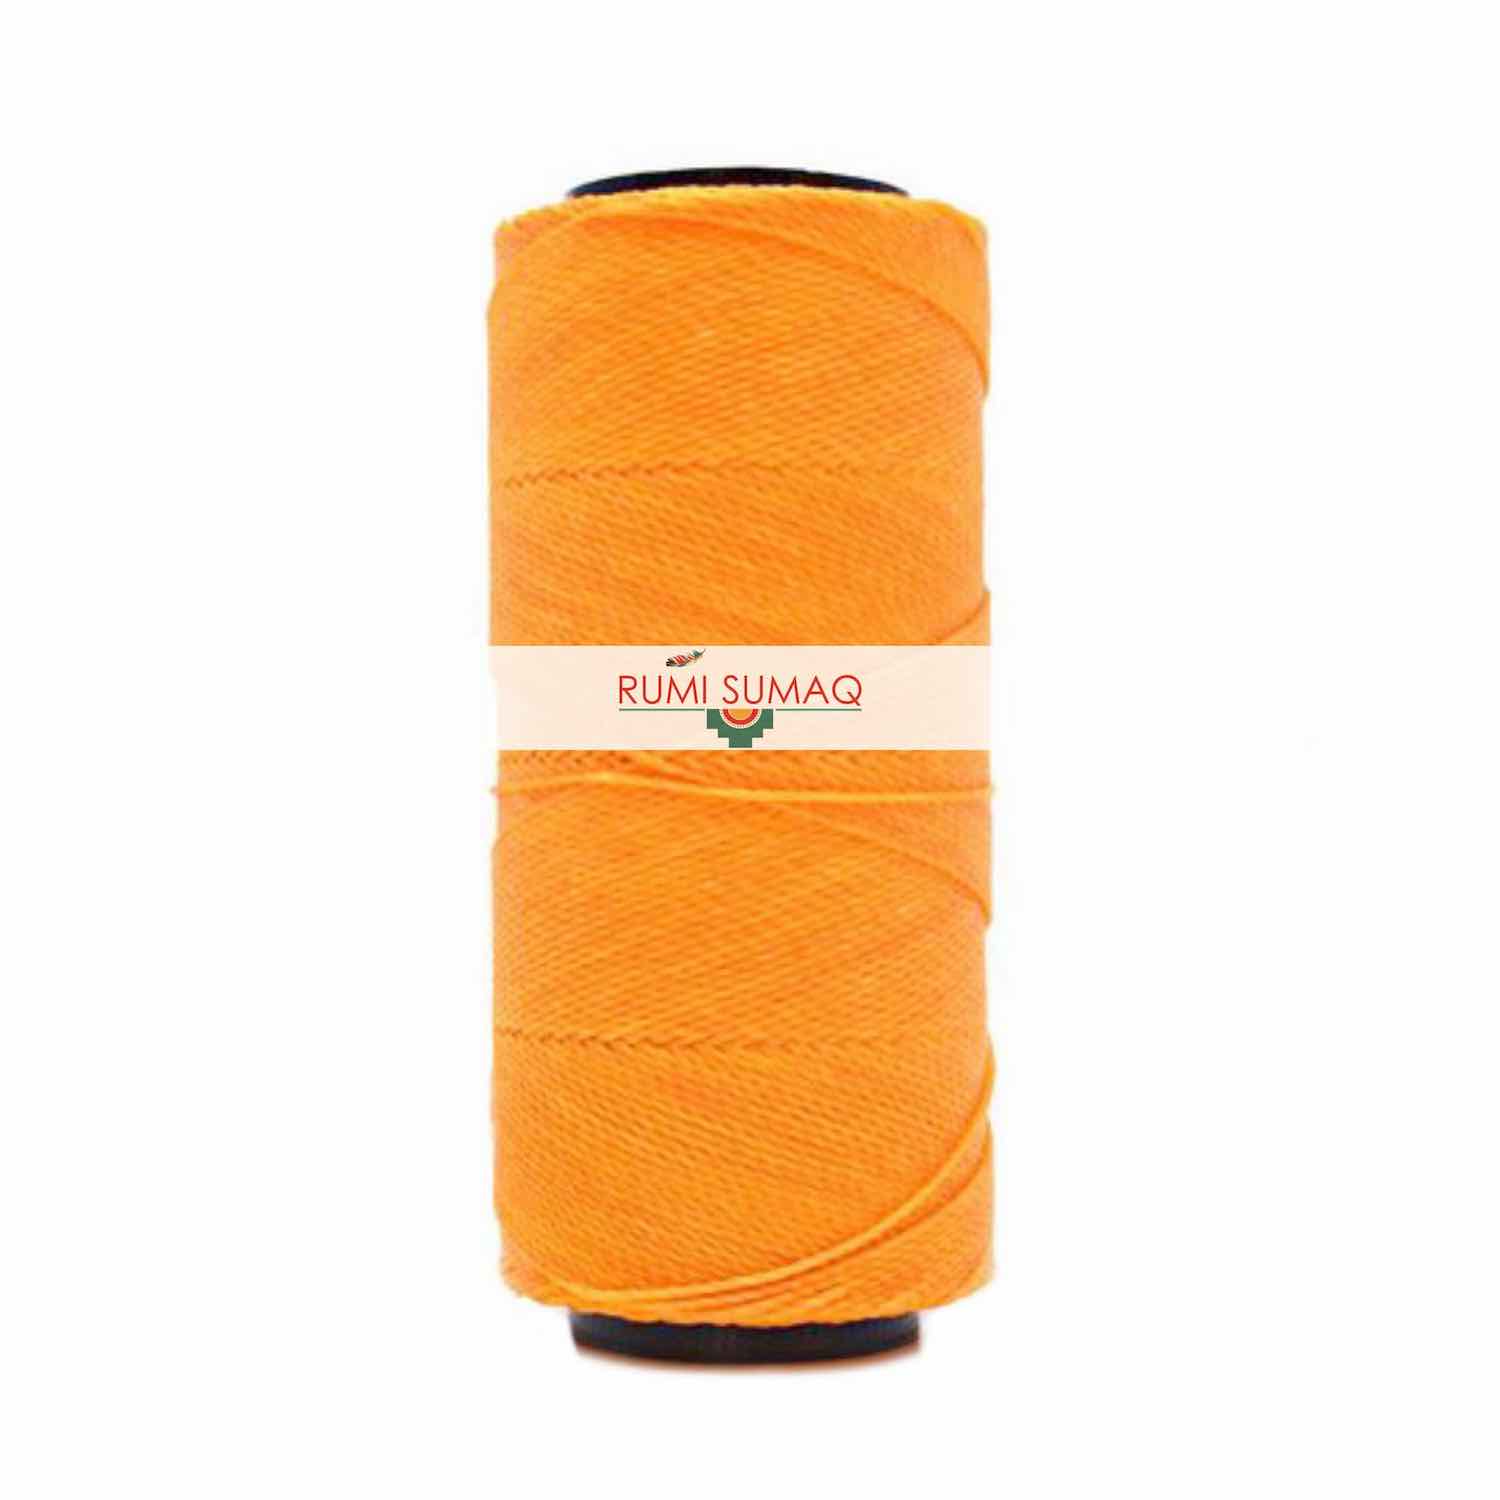 Settanyl 02-274 Clementine 1mm Waxed Polyester Cord | RUMI SUMAQ Waxed Threads for Macrame Knotting, Beading, Quilting, Leather Working and Basket Making